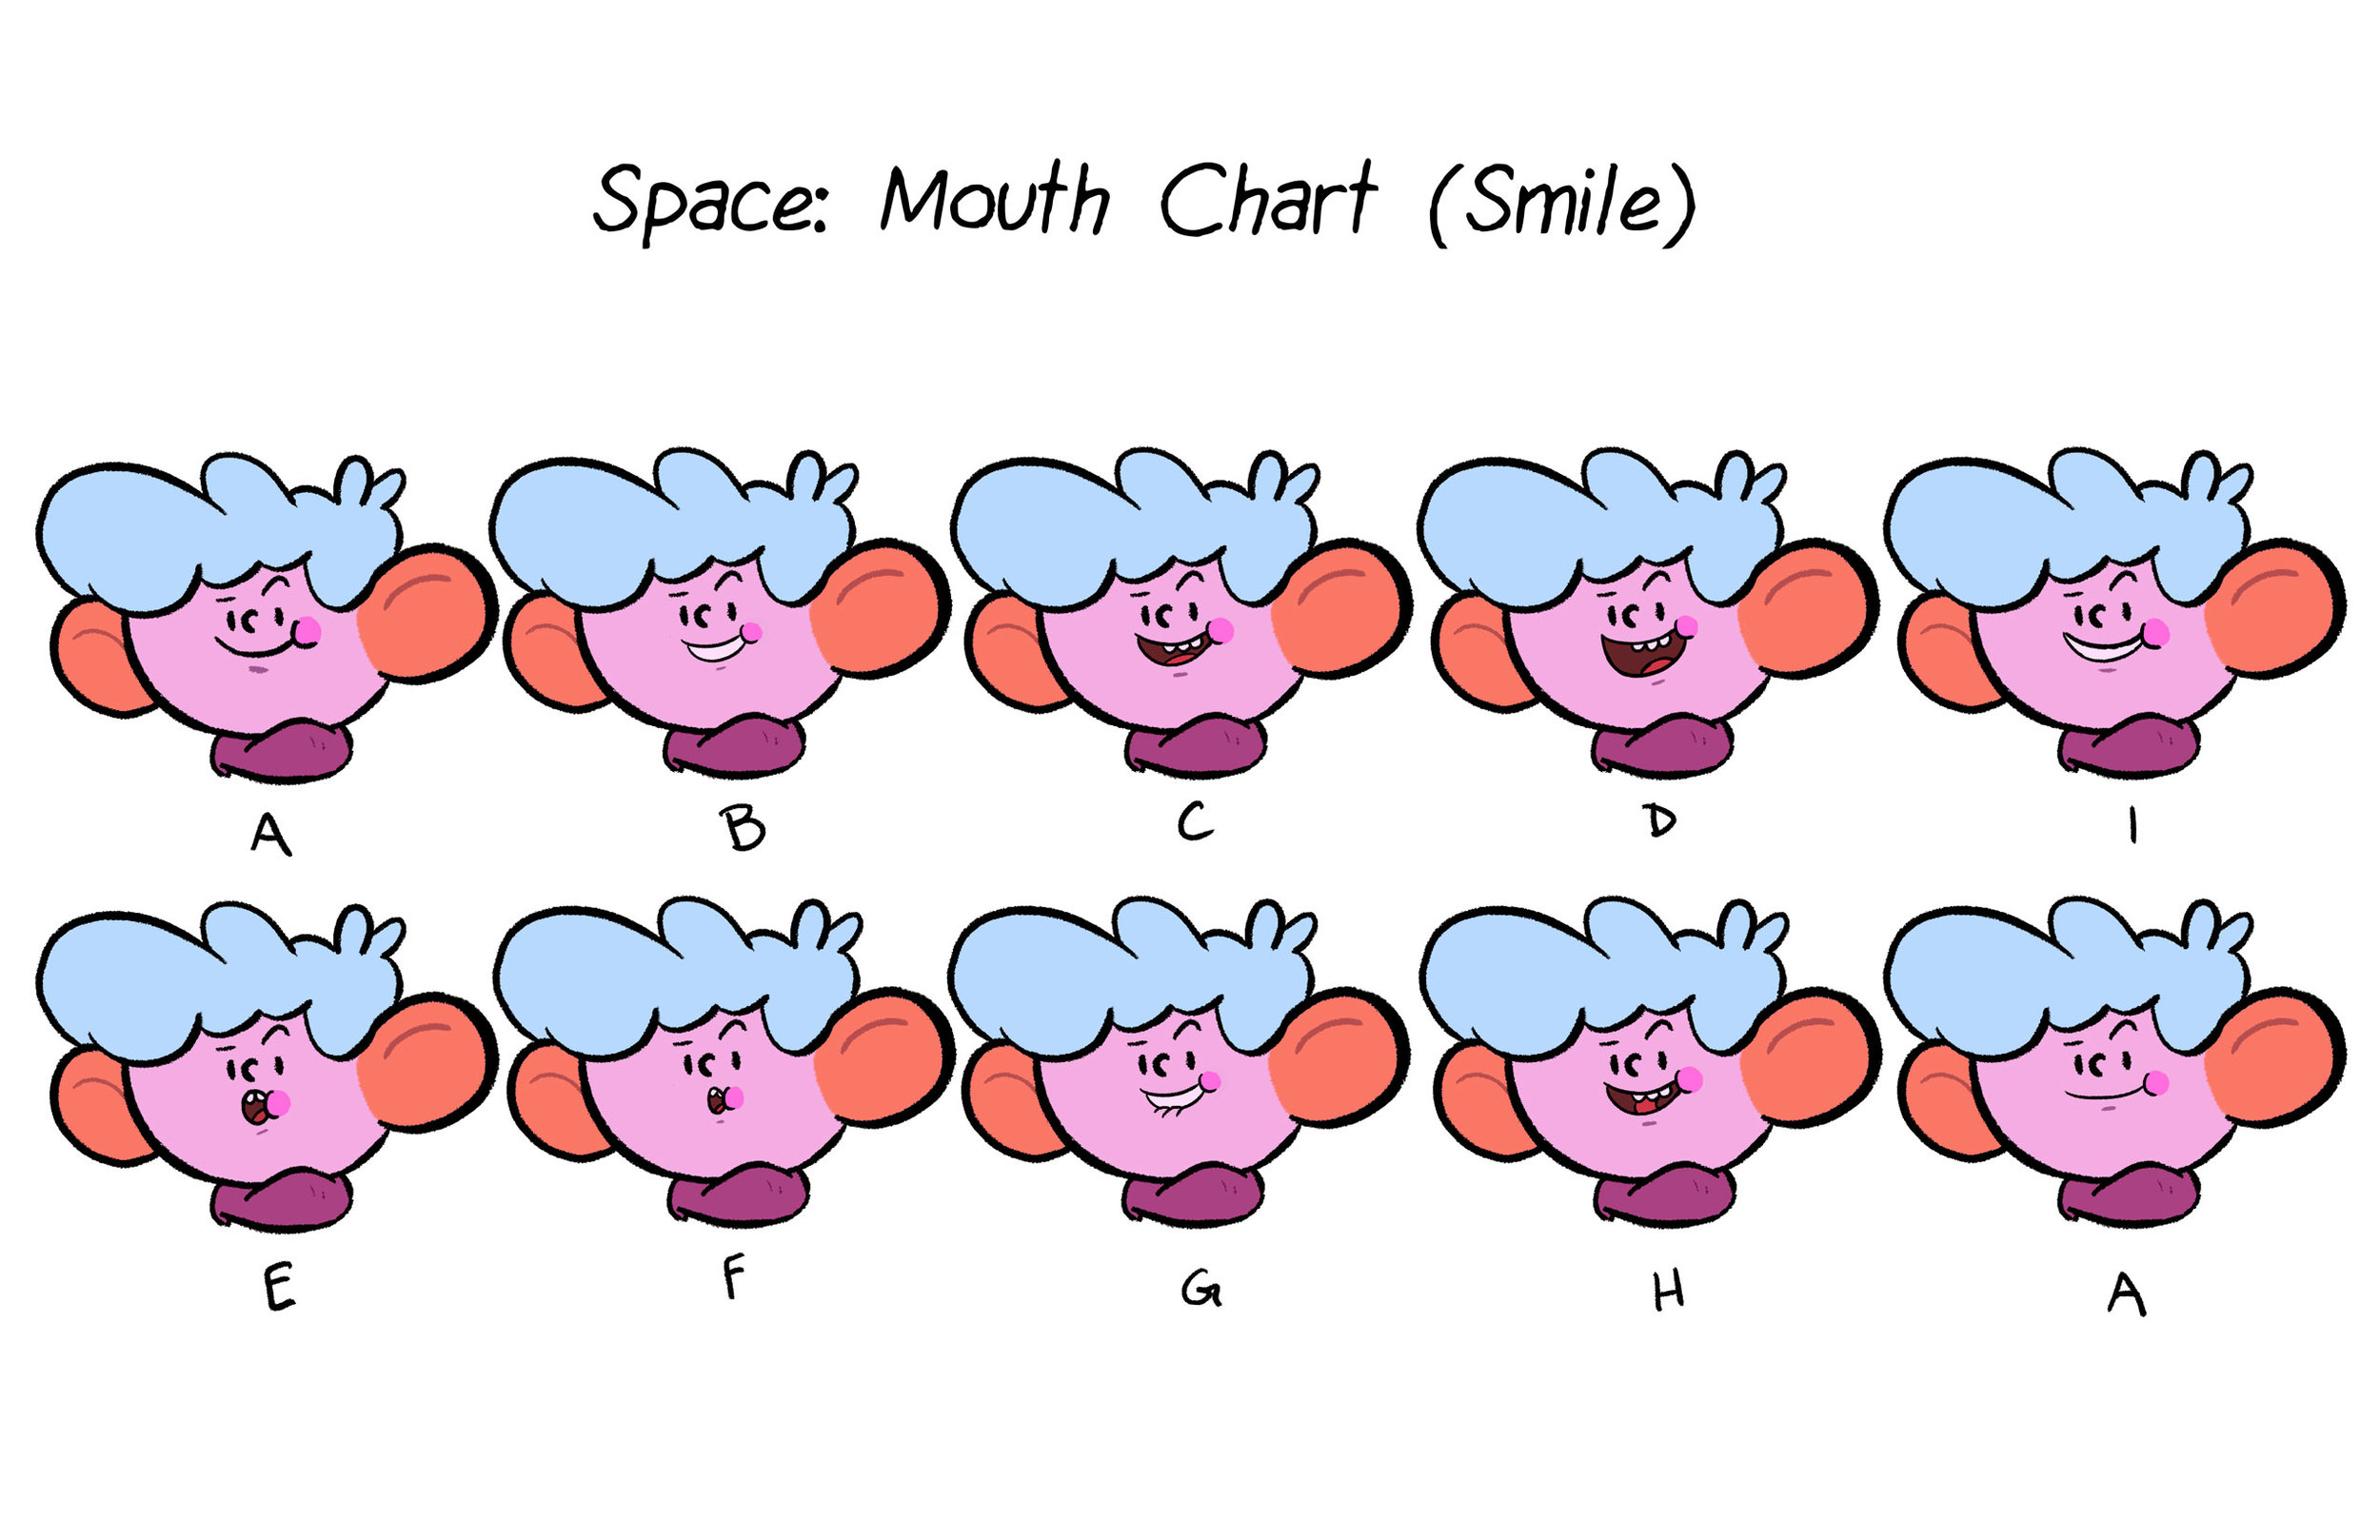 Space: Mouth Chart (Smile)